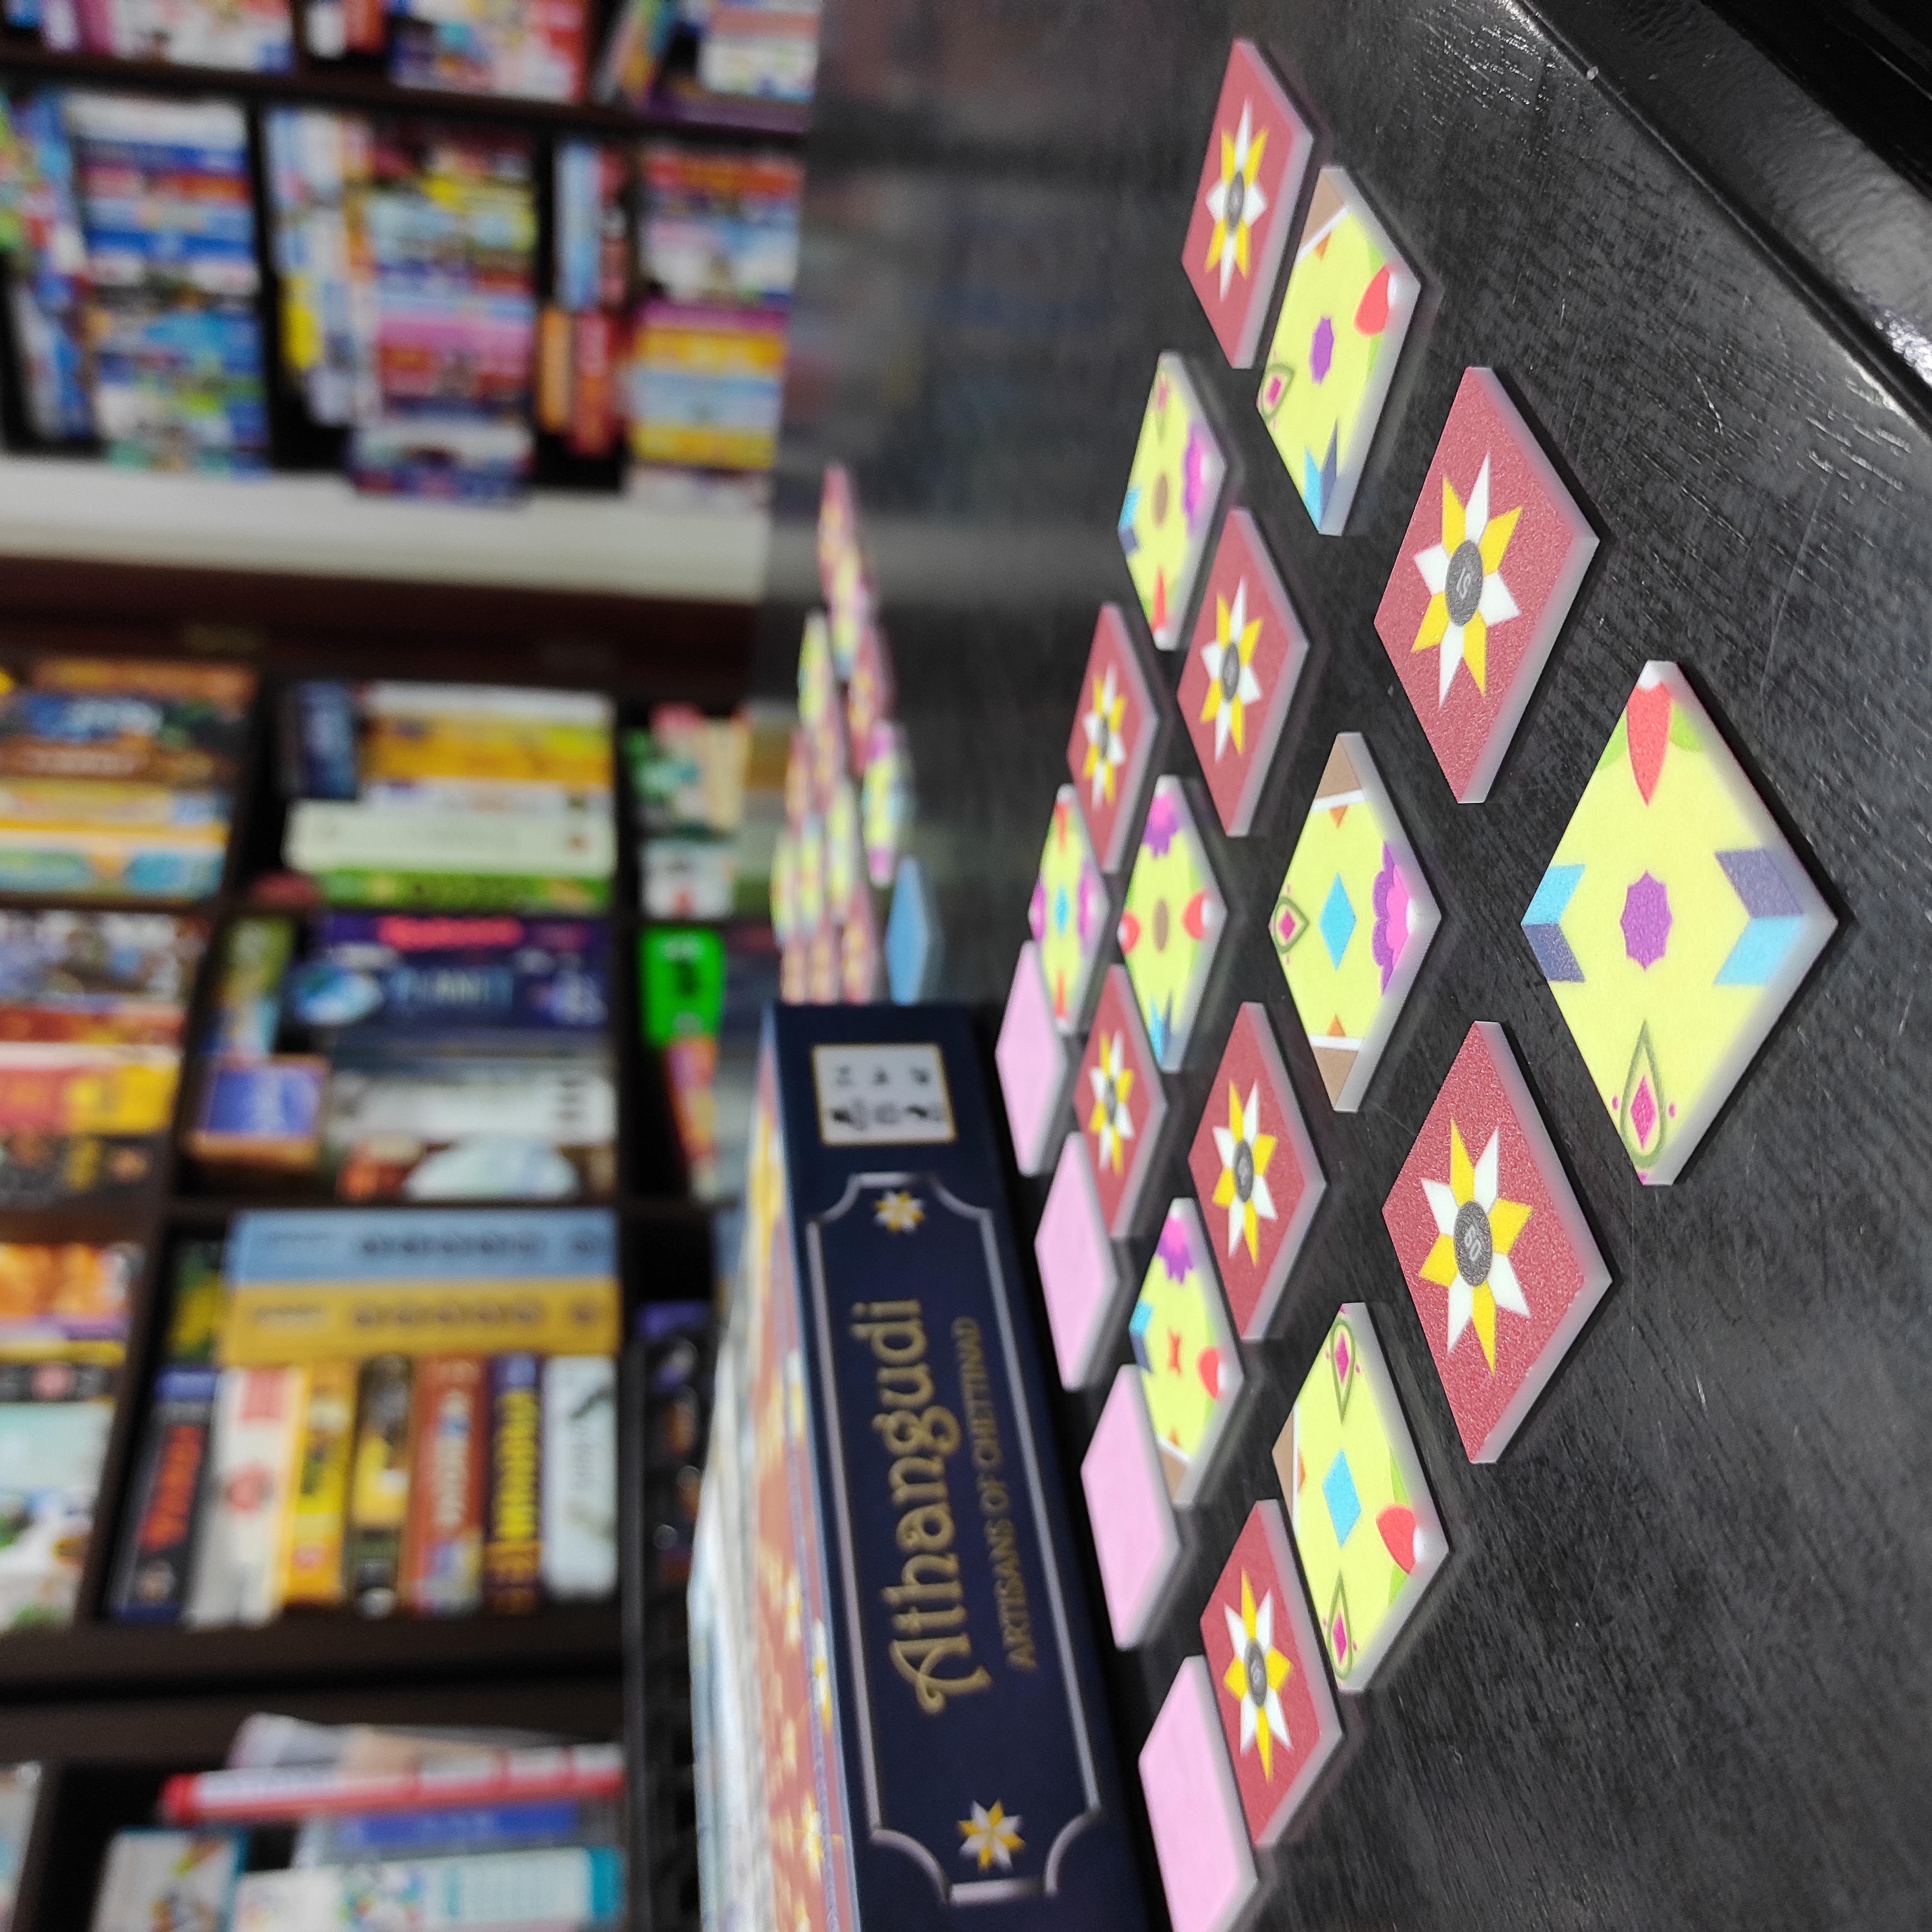 Tiles of the game Athangudi: Artisans of Chettinad, laid out on a table. The game box is visible in the background, as as several shelves filled with boardgames. 